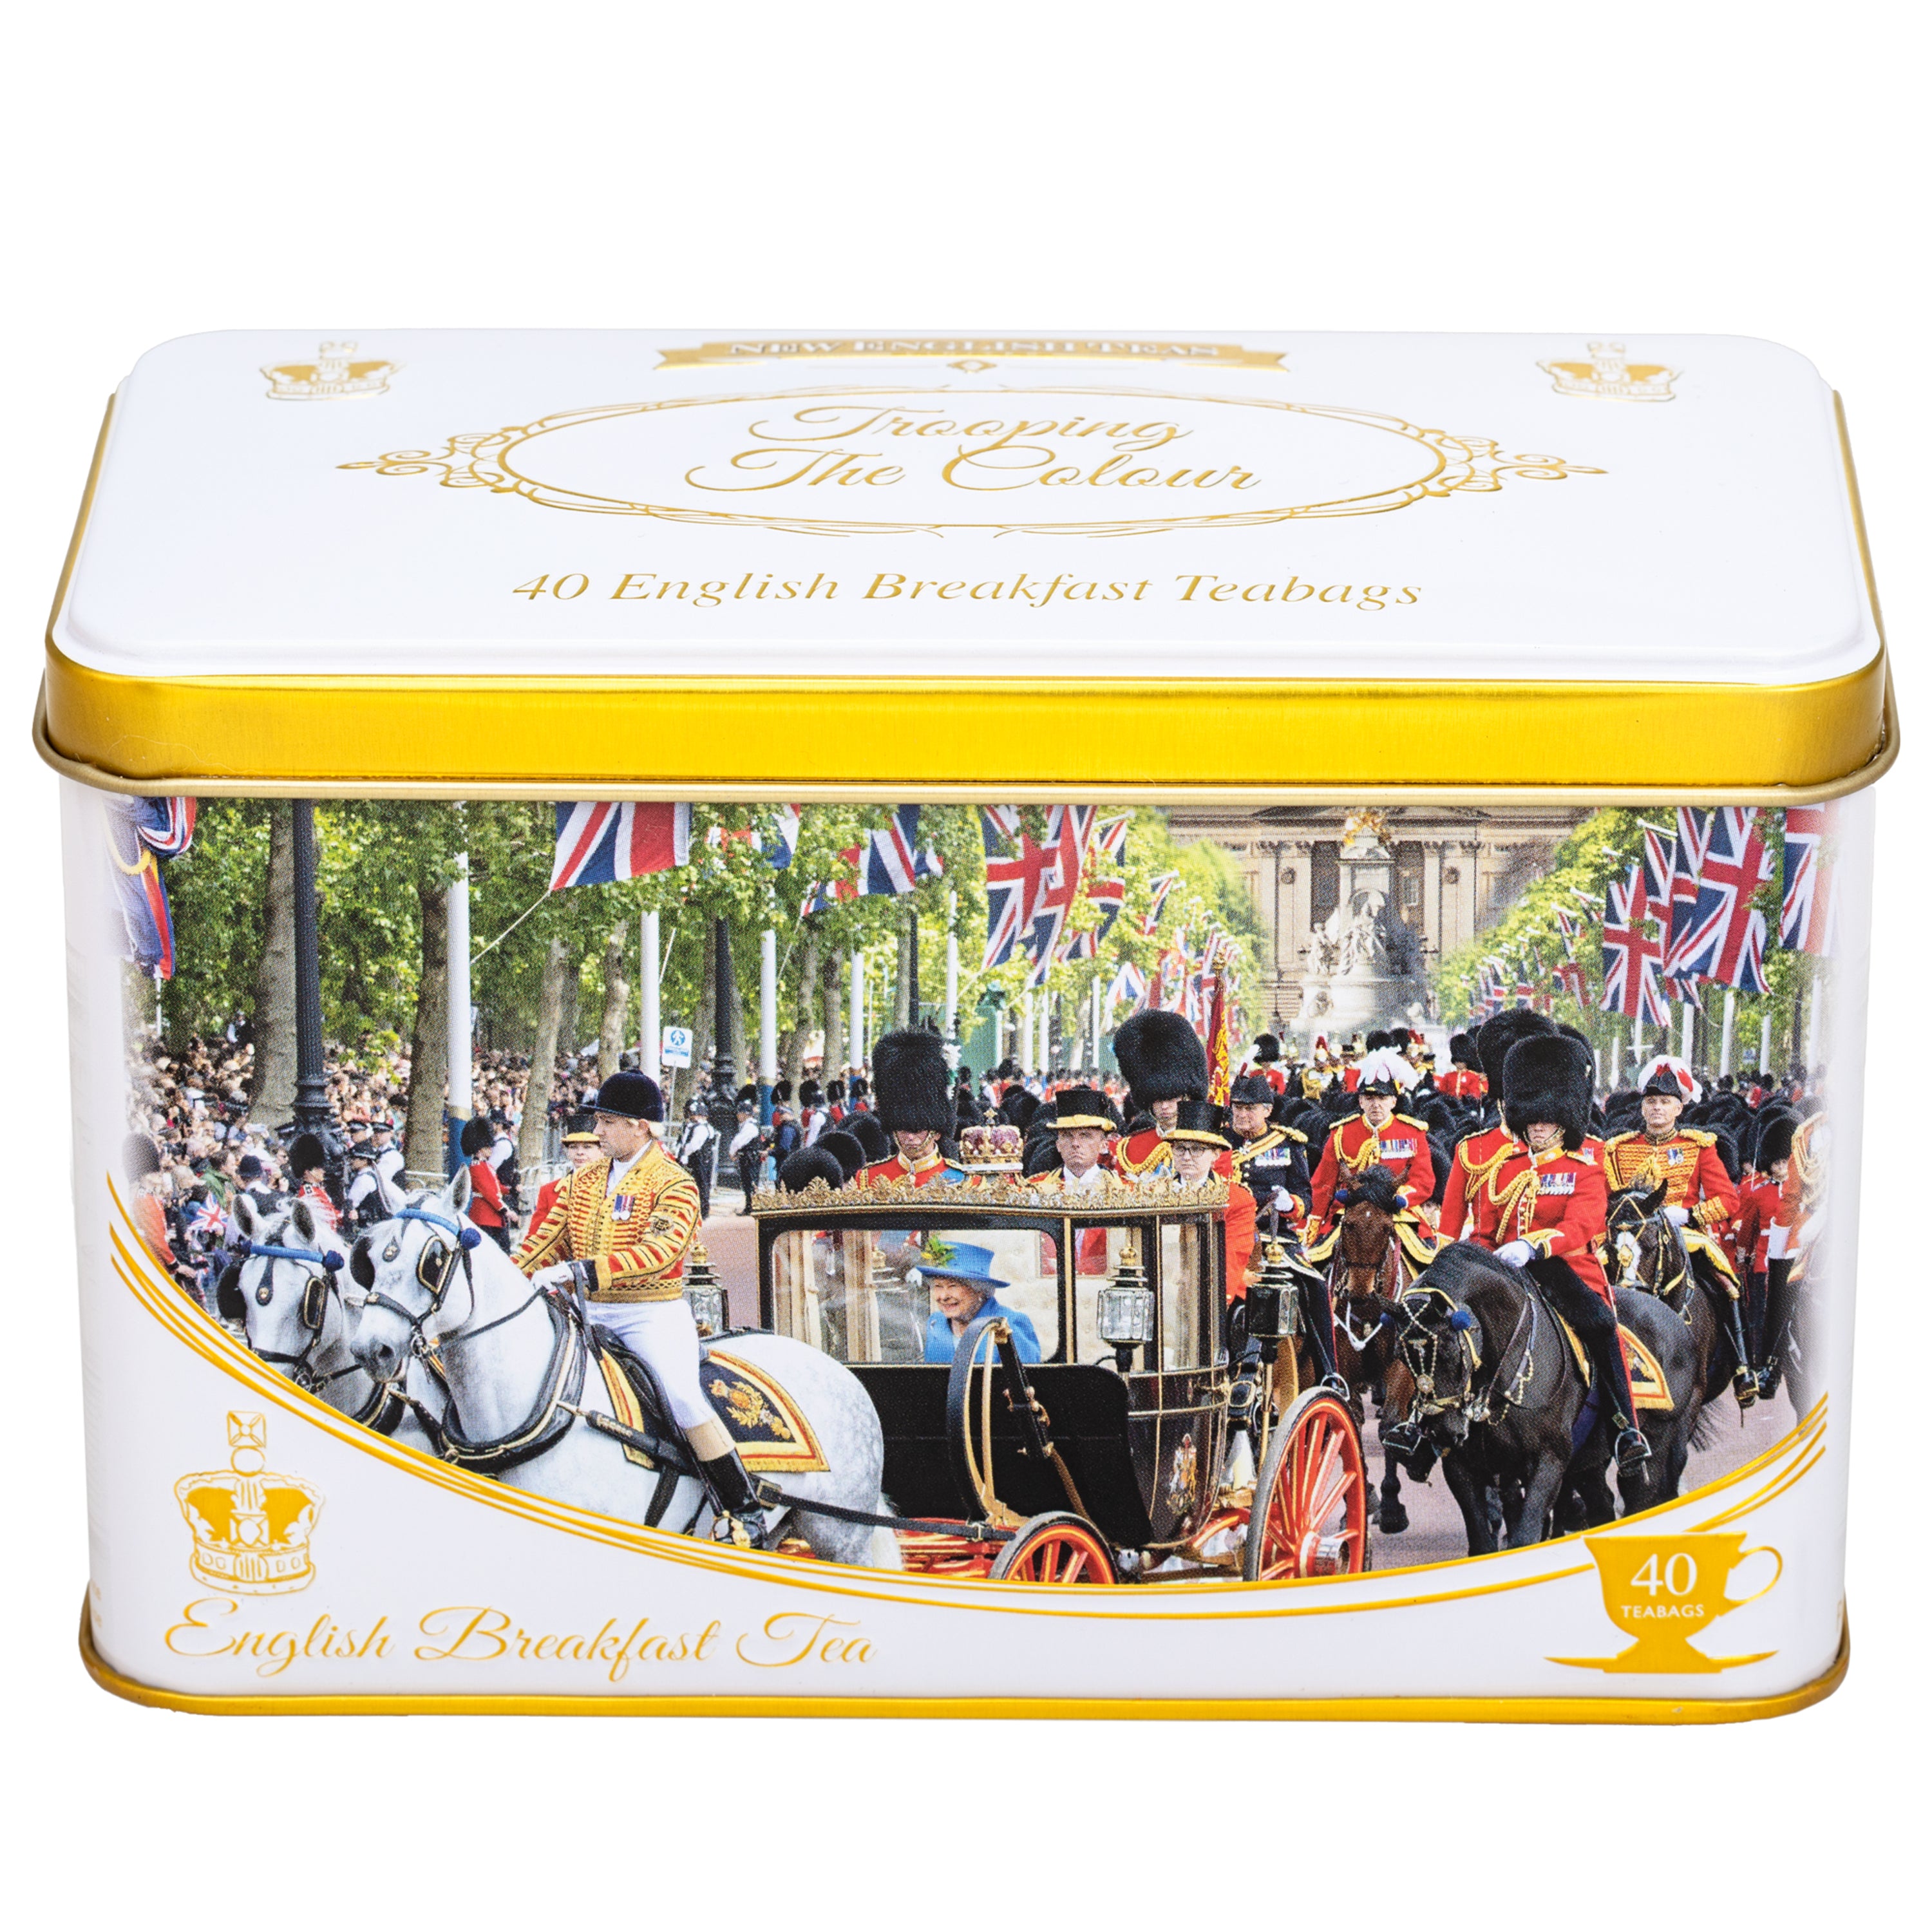 Trooping The Colour Queen Elizabeth II Tea Tin with 40 English Breakfast Teabags New English Teas 